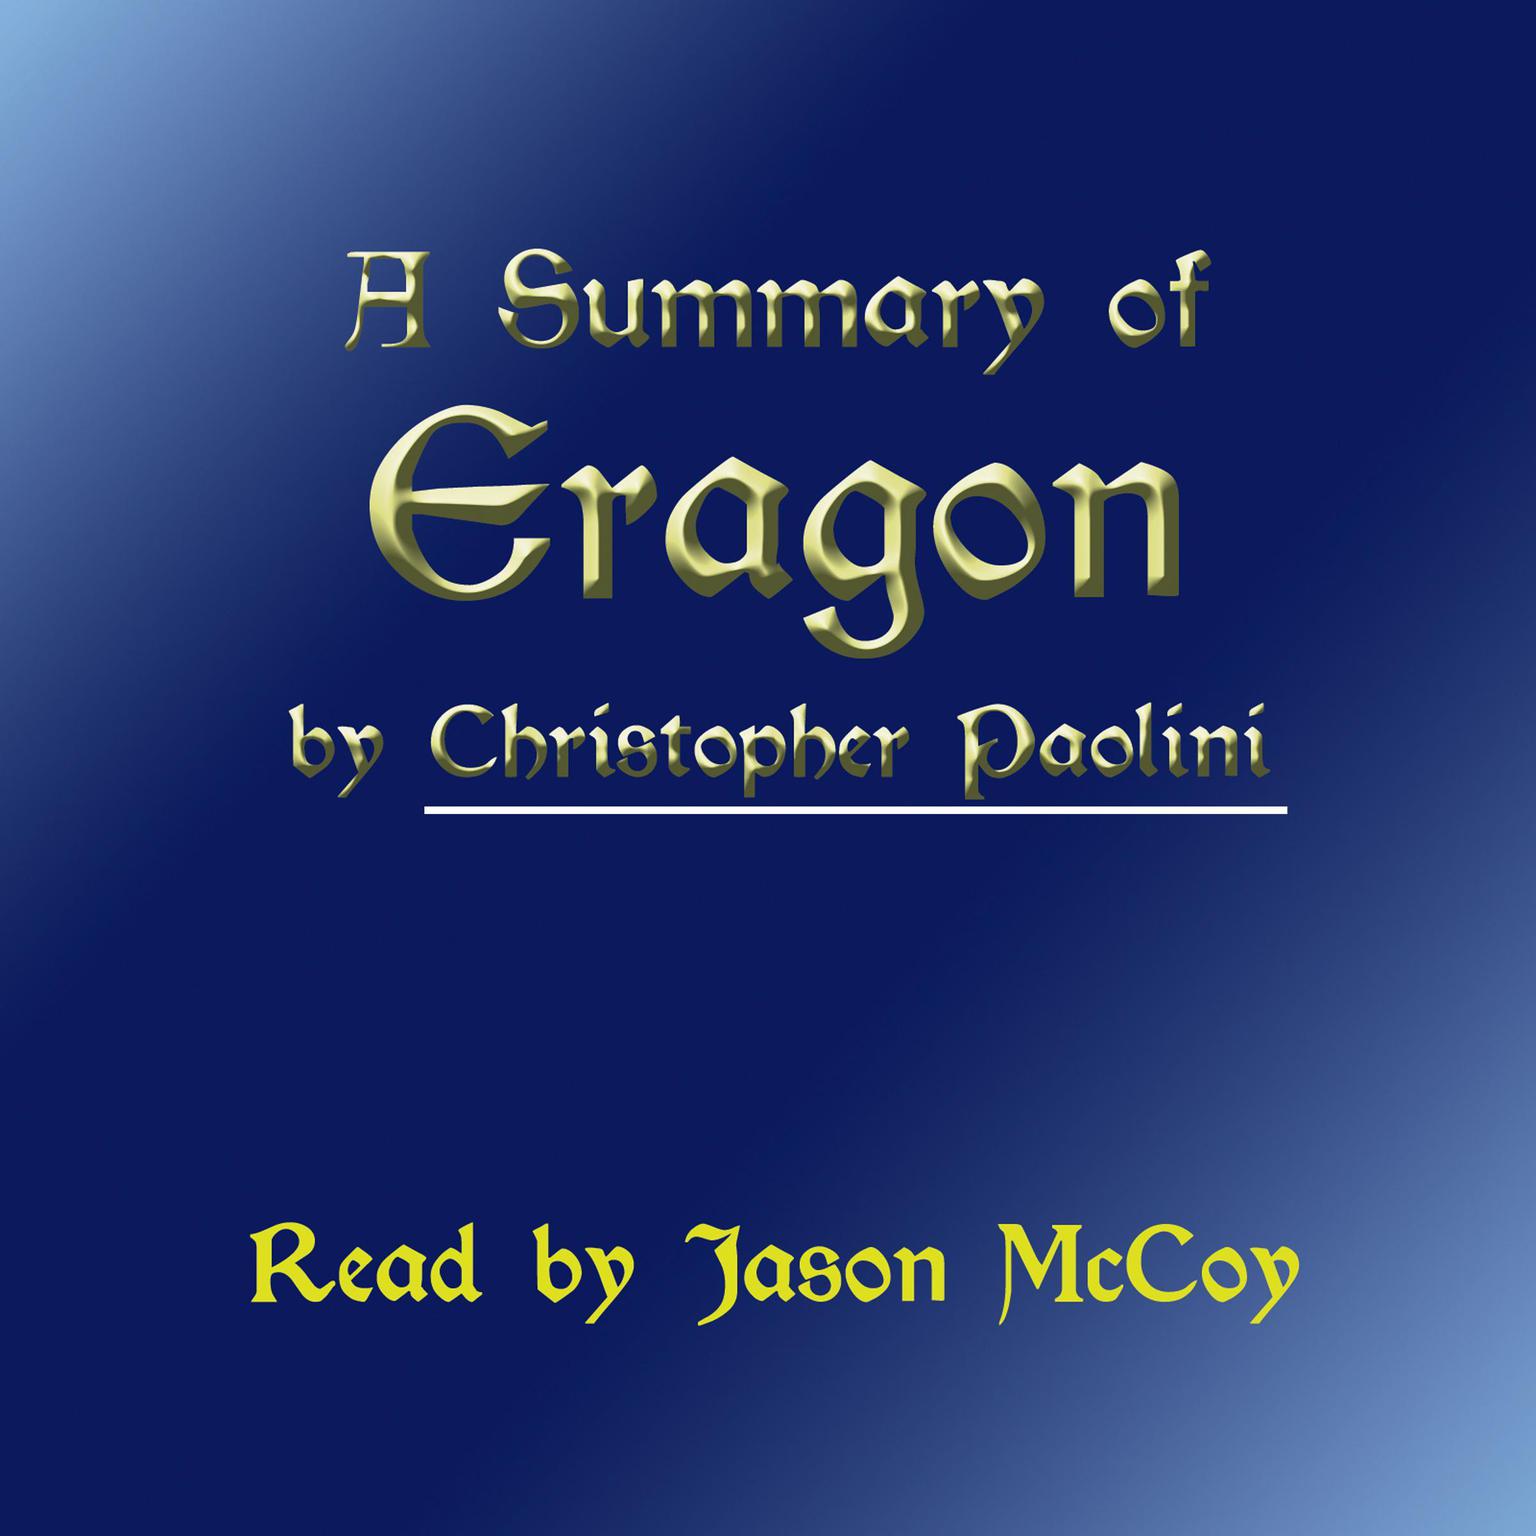 A Summary of Eragon Audiobook, by Christopher Paolini